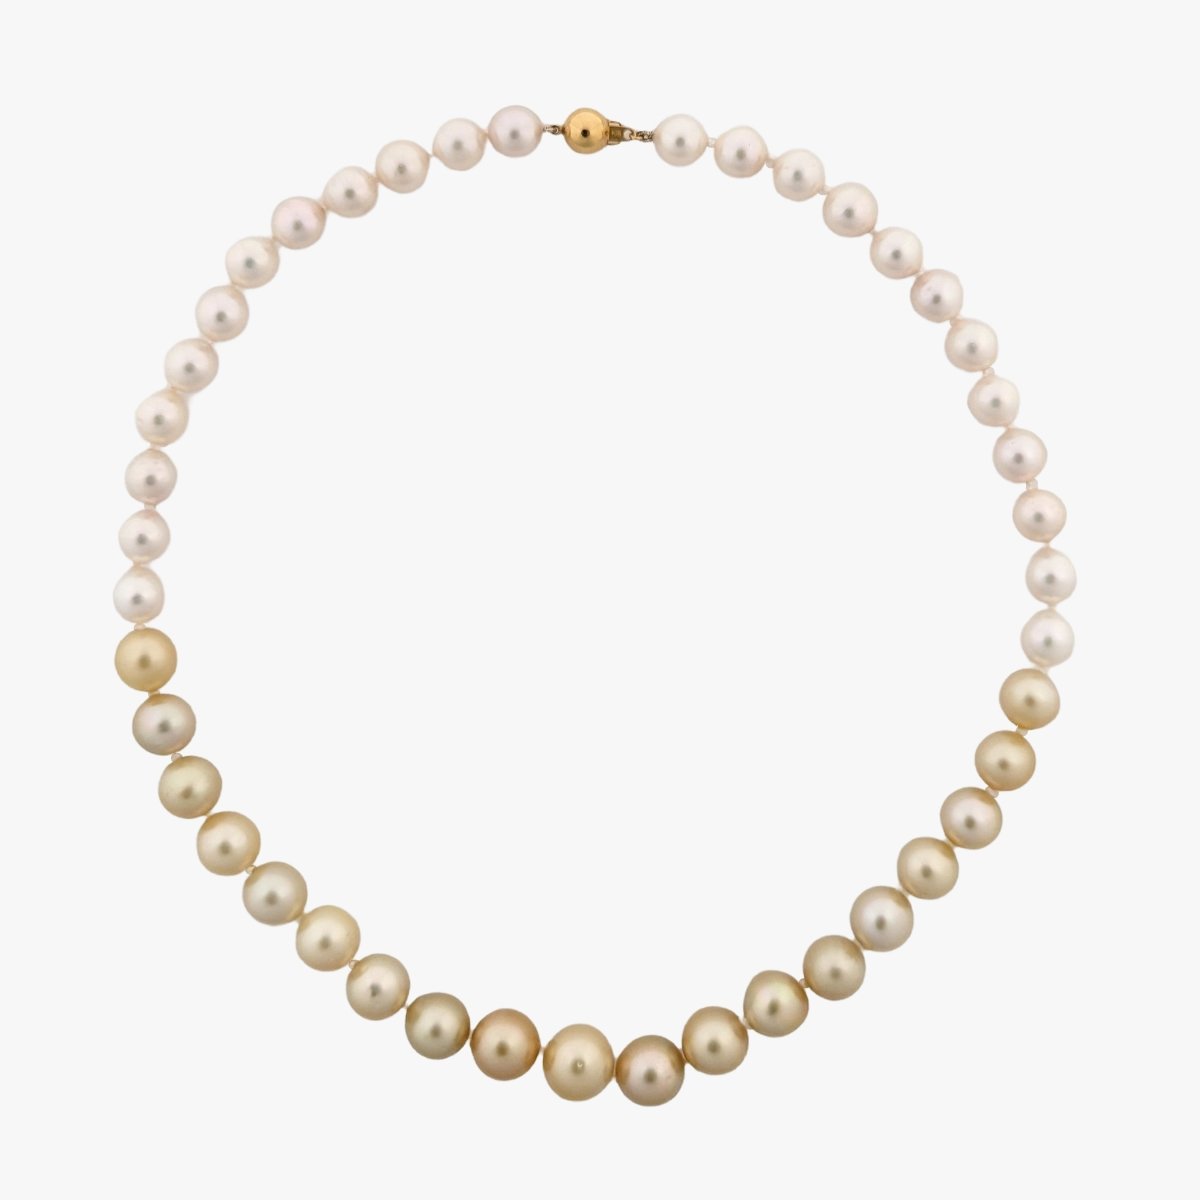 9-13mm Ombre White and Golden South Sea Pearl Necklace